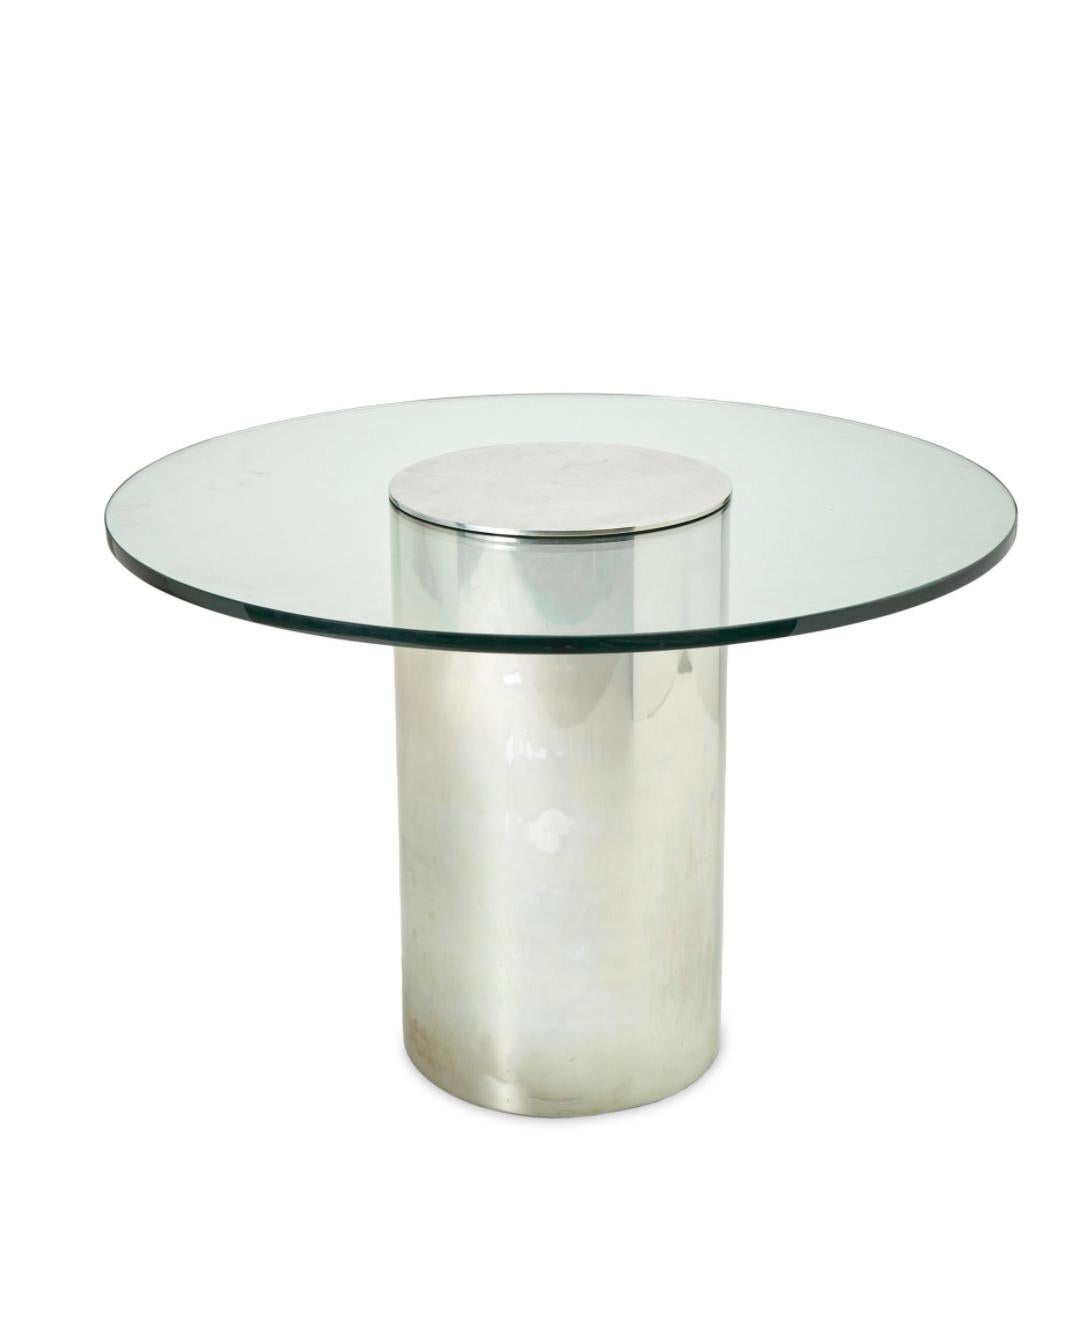 Contemporary table with a polished, cylindrical chrome base and a circular glass top. 1980s Brueton-style contemporary table with a polished, cylindrical chrome base and circular glass top. One-inch beveled glass in very good condition. The base has